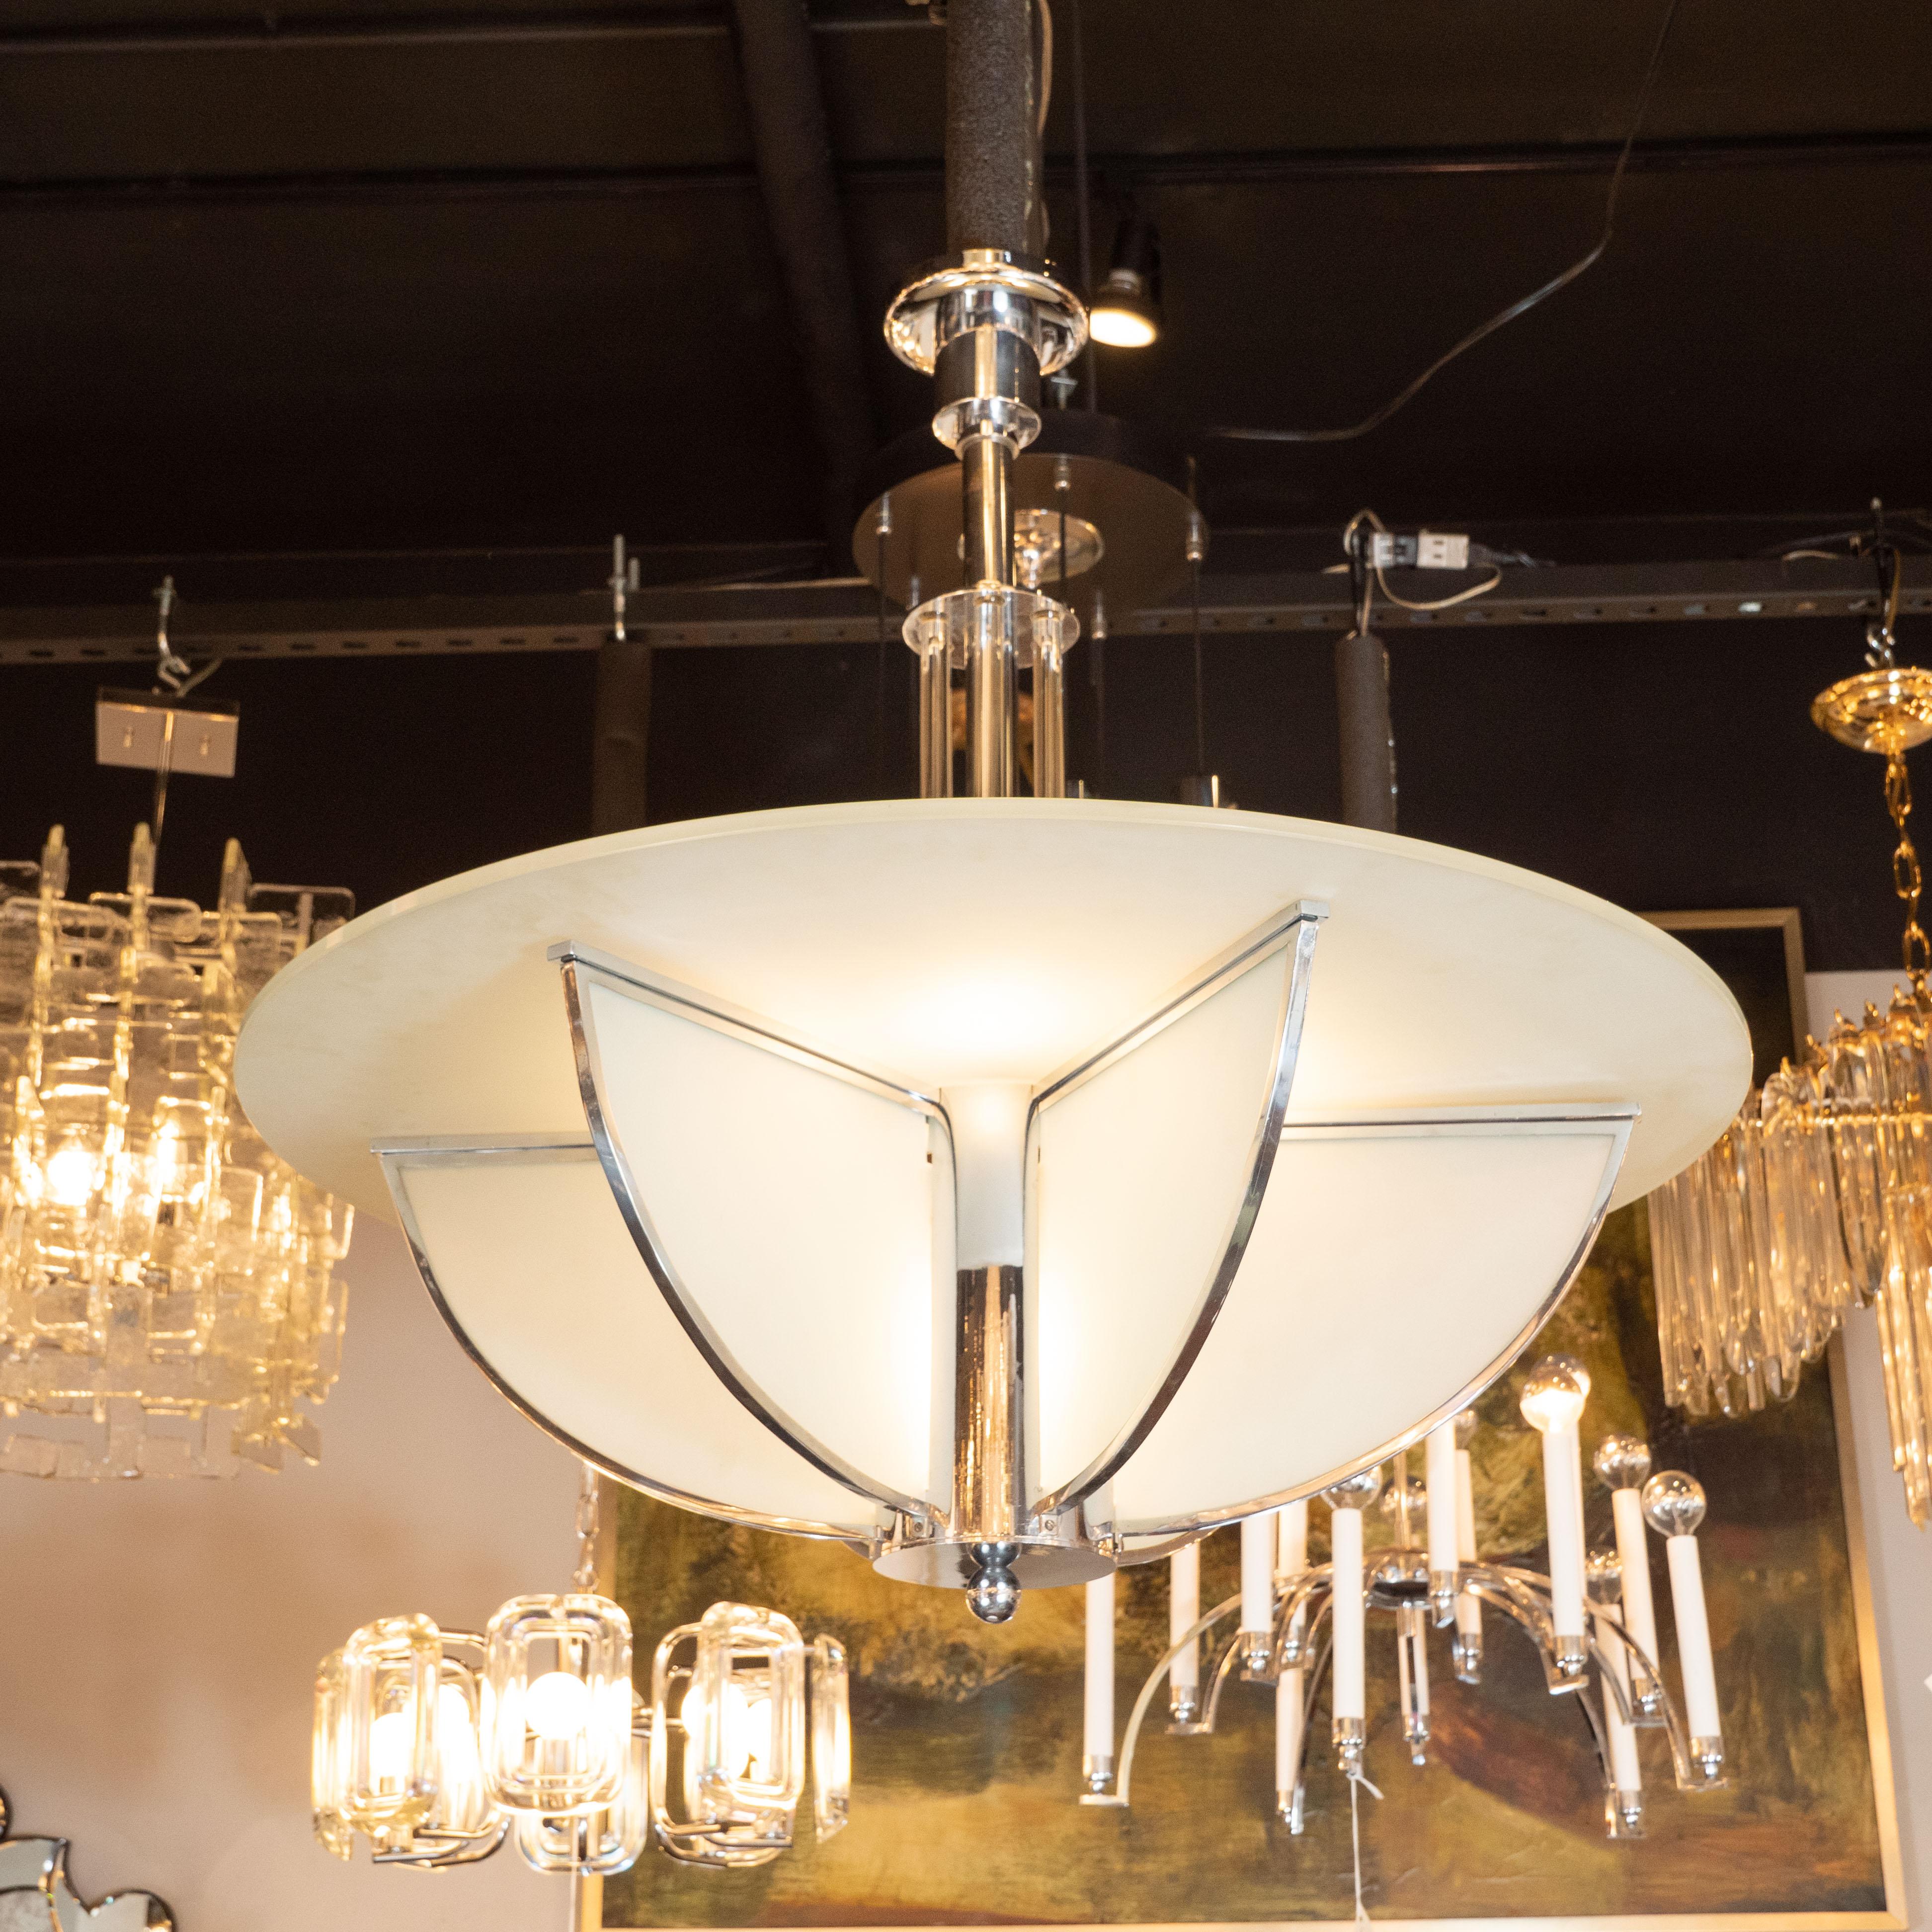 This stunning and graphic Art Deco Machine Age chandelier was realized in France, circa 1935. It features four streamlined fin forms in frosted glass wrapped with chrome that affix to a central cylindrical chrome support capped at its base with an